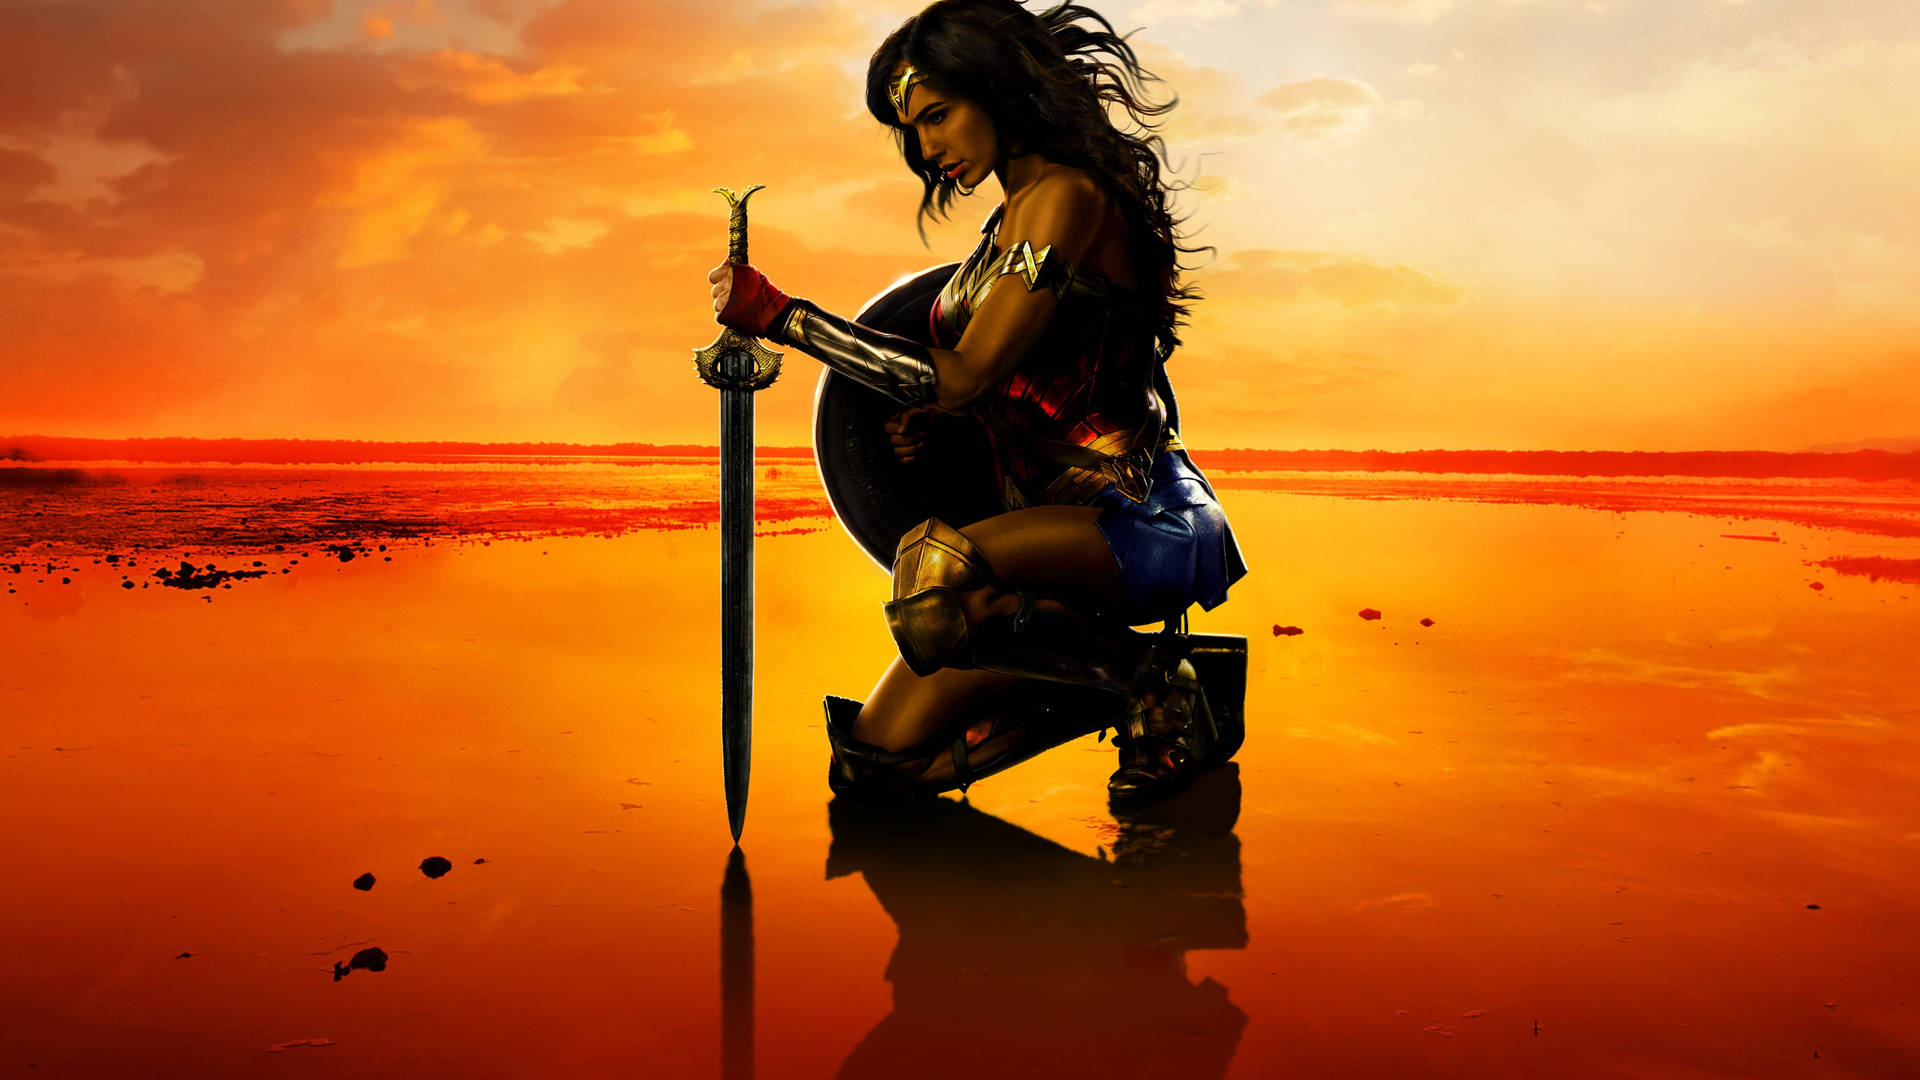 Dawn of a new day for Wonder Woman Wallpaper